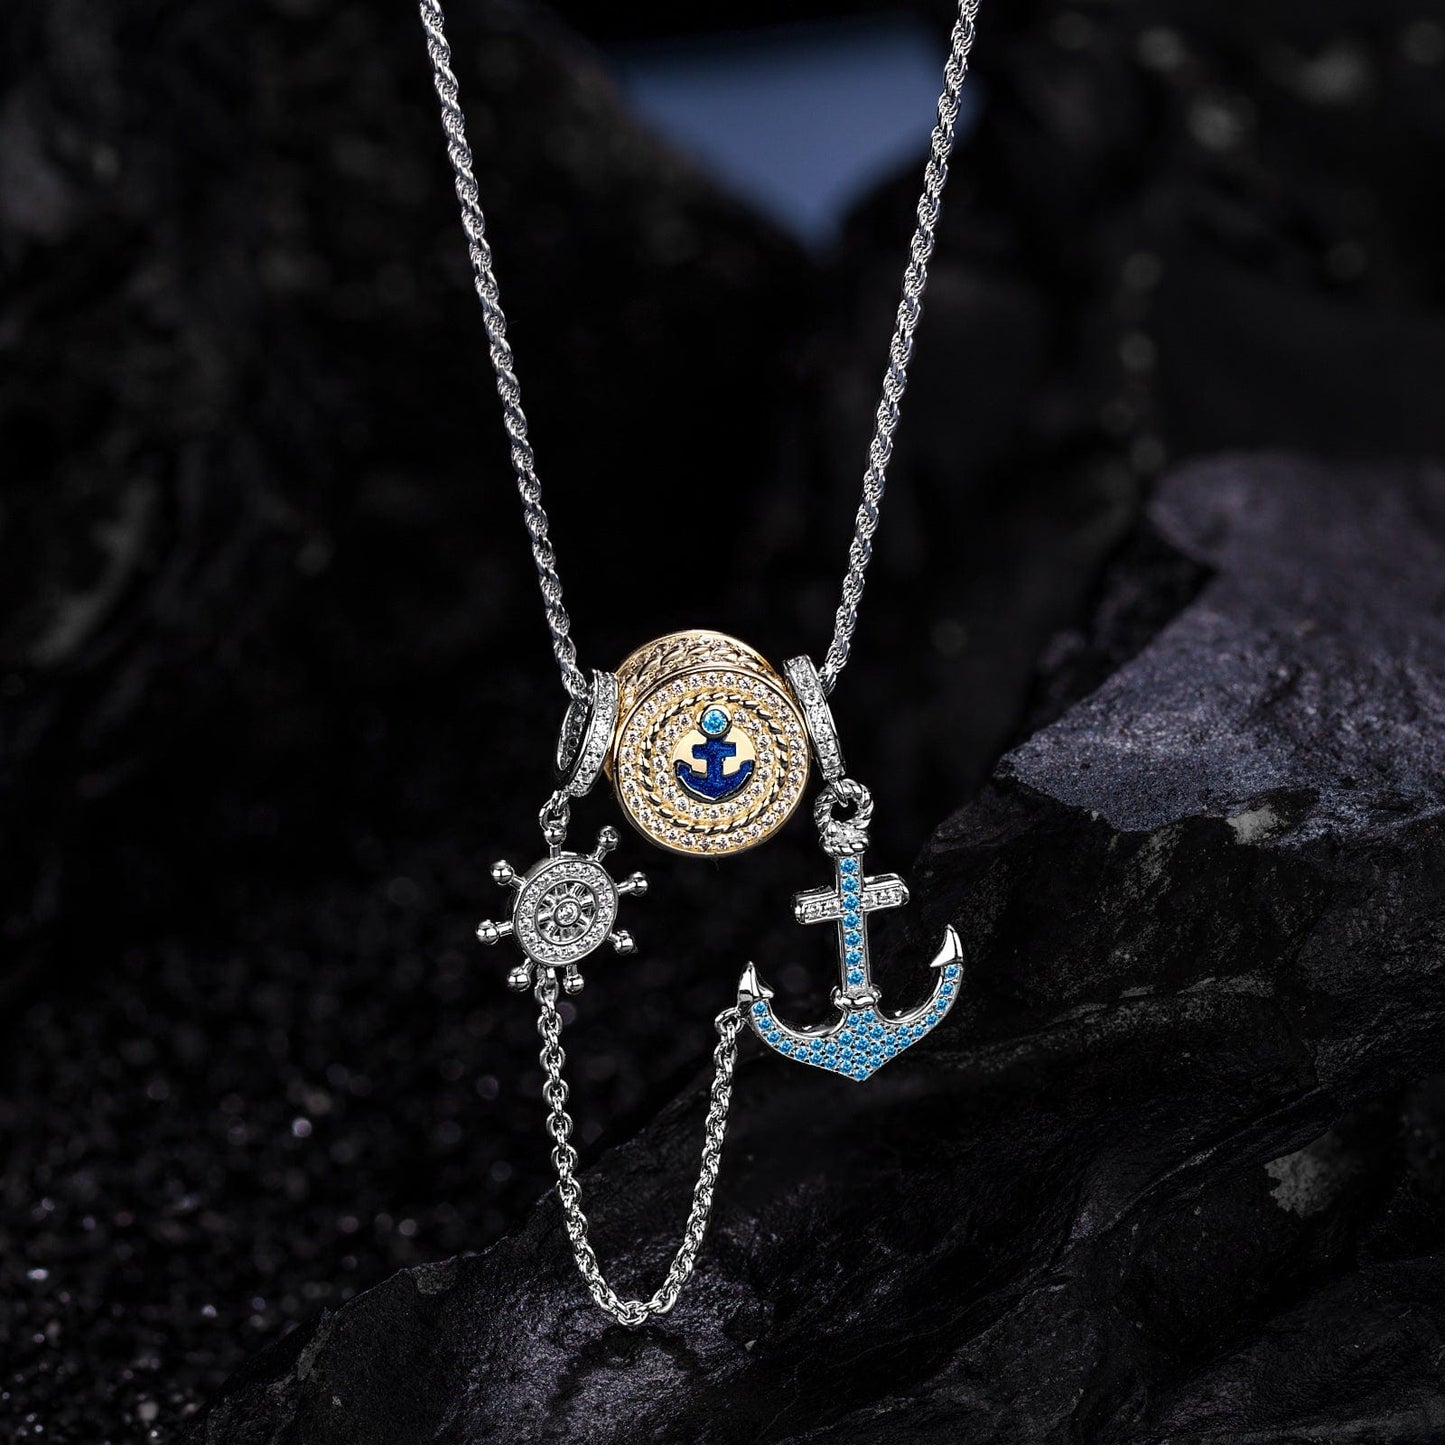 Sterling Silver Anchor And Helm Charms Necklace Set With Enamel, Featuring Dual Plating in White Gold and 14K Gold